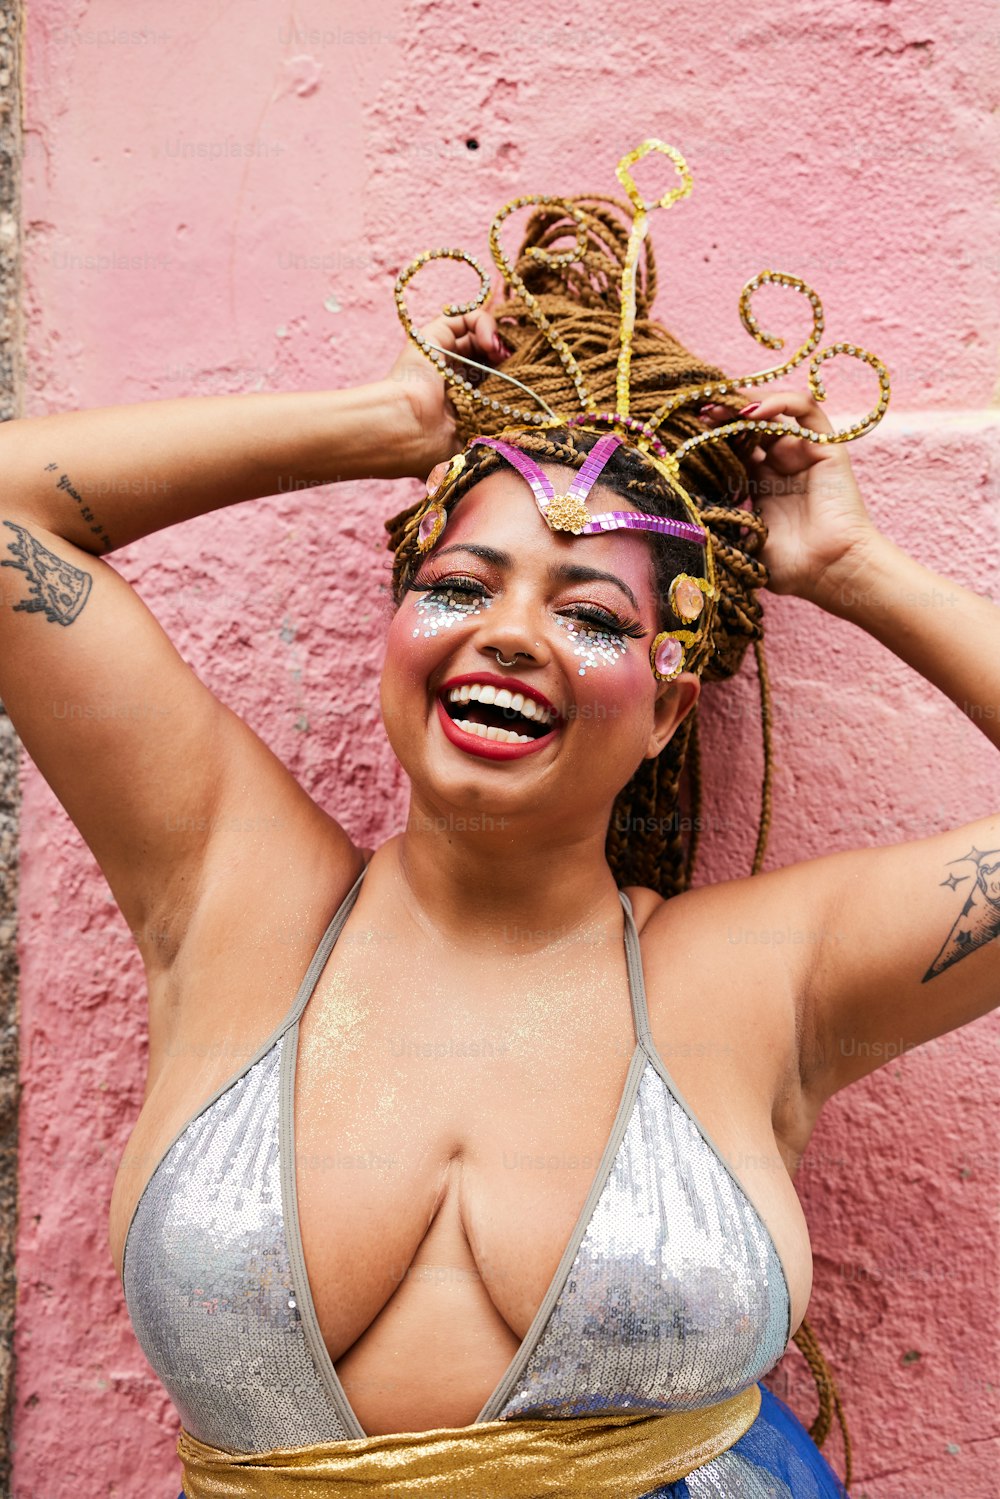 a woman in a silver bikini top with a gold crown on her head